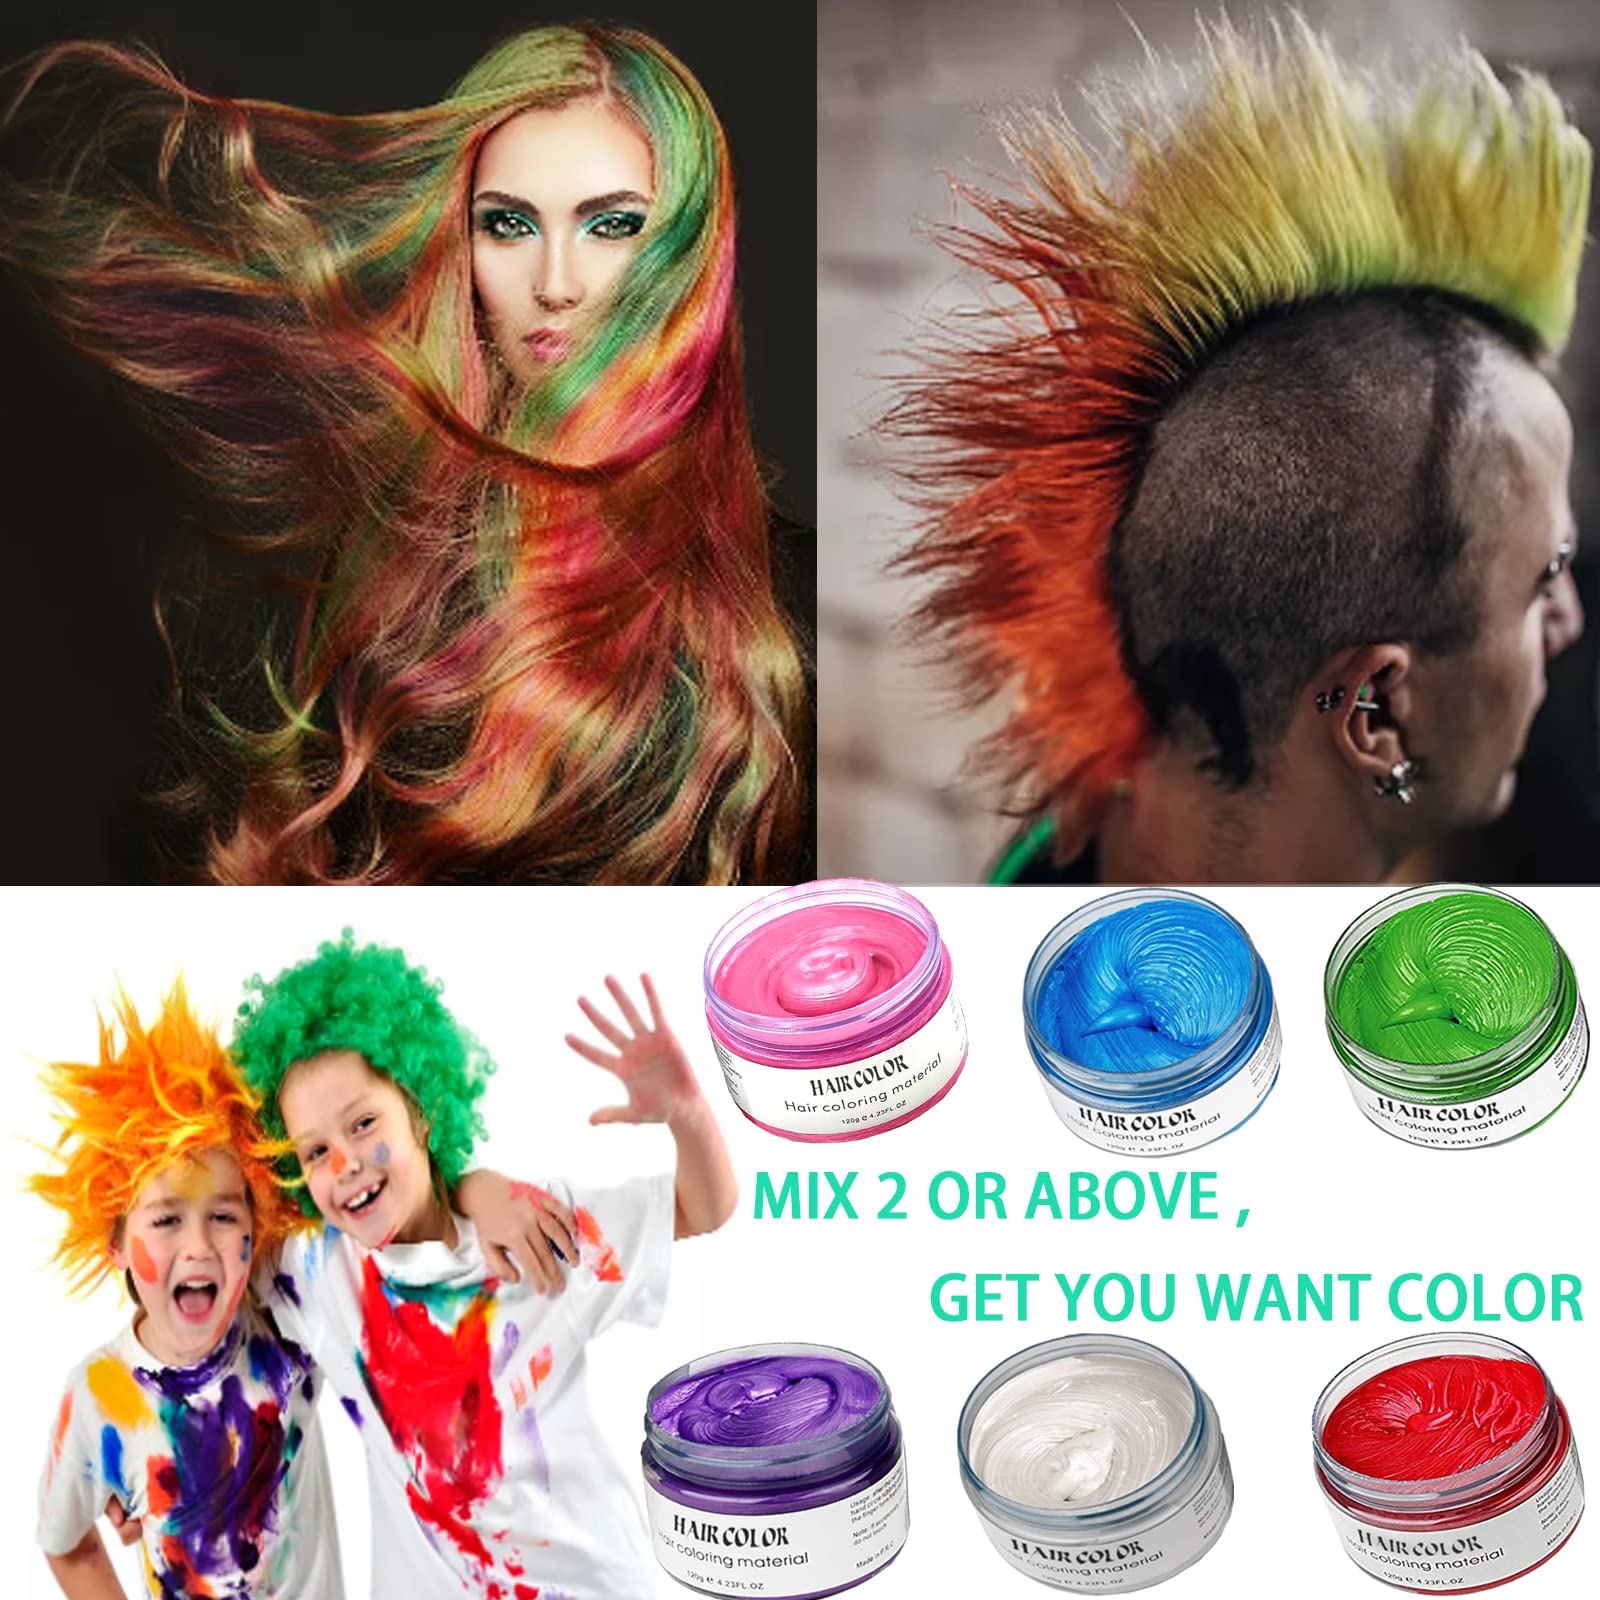 Blue Green Purple Red White Pink Hair Dye Temporary Hair Color Wax,Acosexy Fashion Colorful Hair Wax Pomades Disposable Natural Hair Strong Style Gel Cream Hair Dye,Instant Hairstyle Mud Cream for Party, Cosplay, Masquerade etc. (6 Color-Blue Green Purple